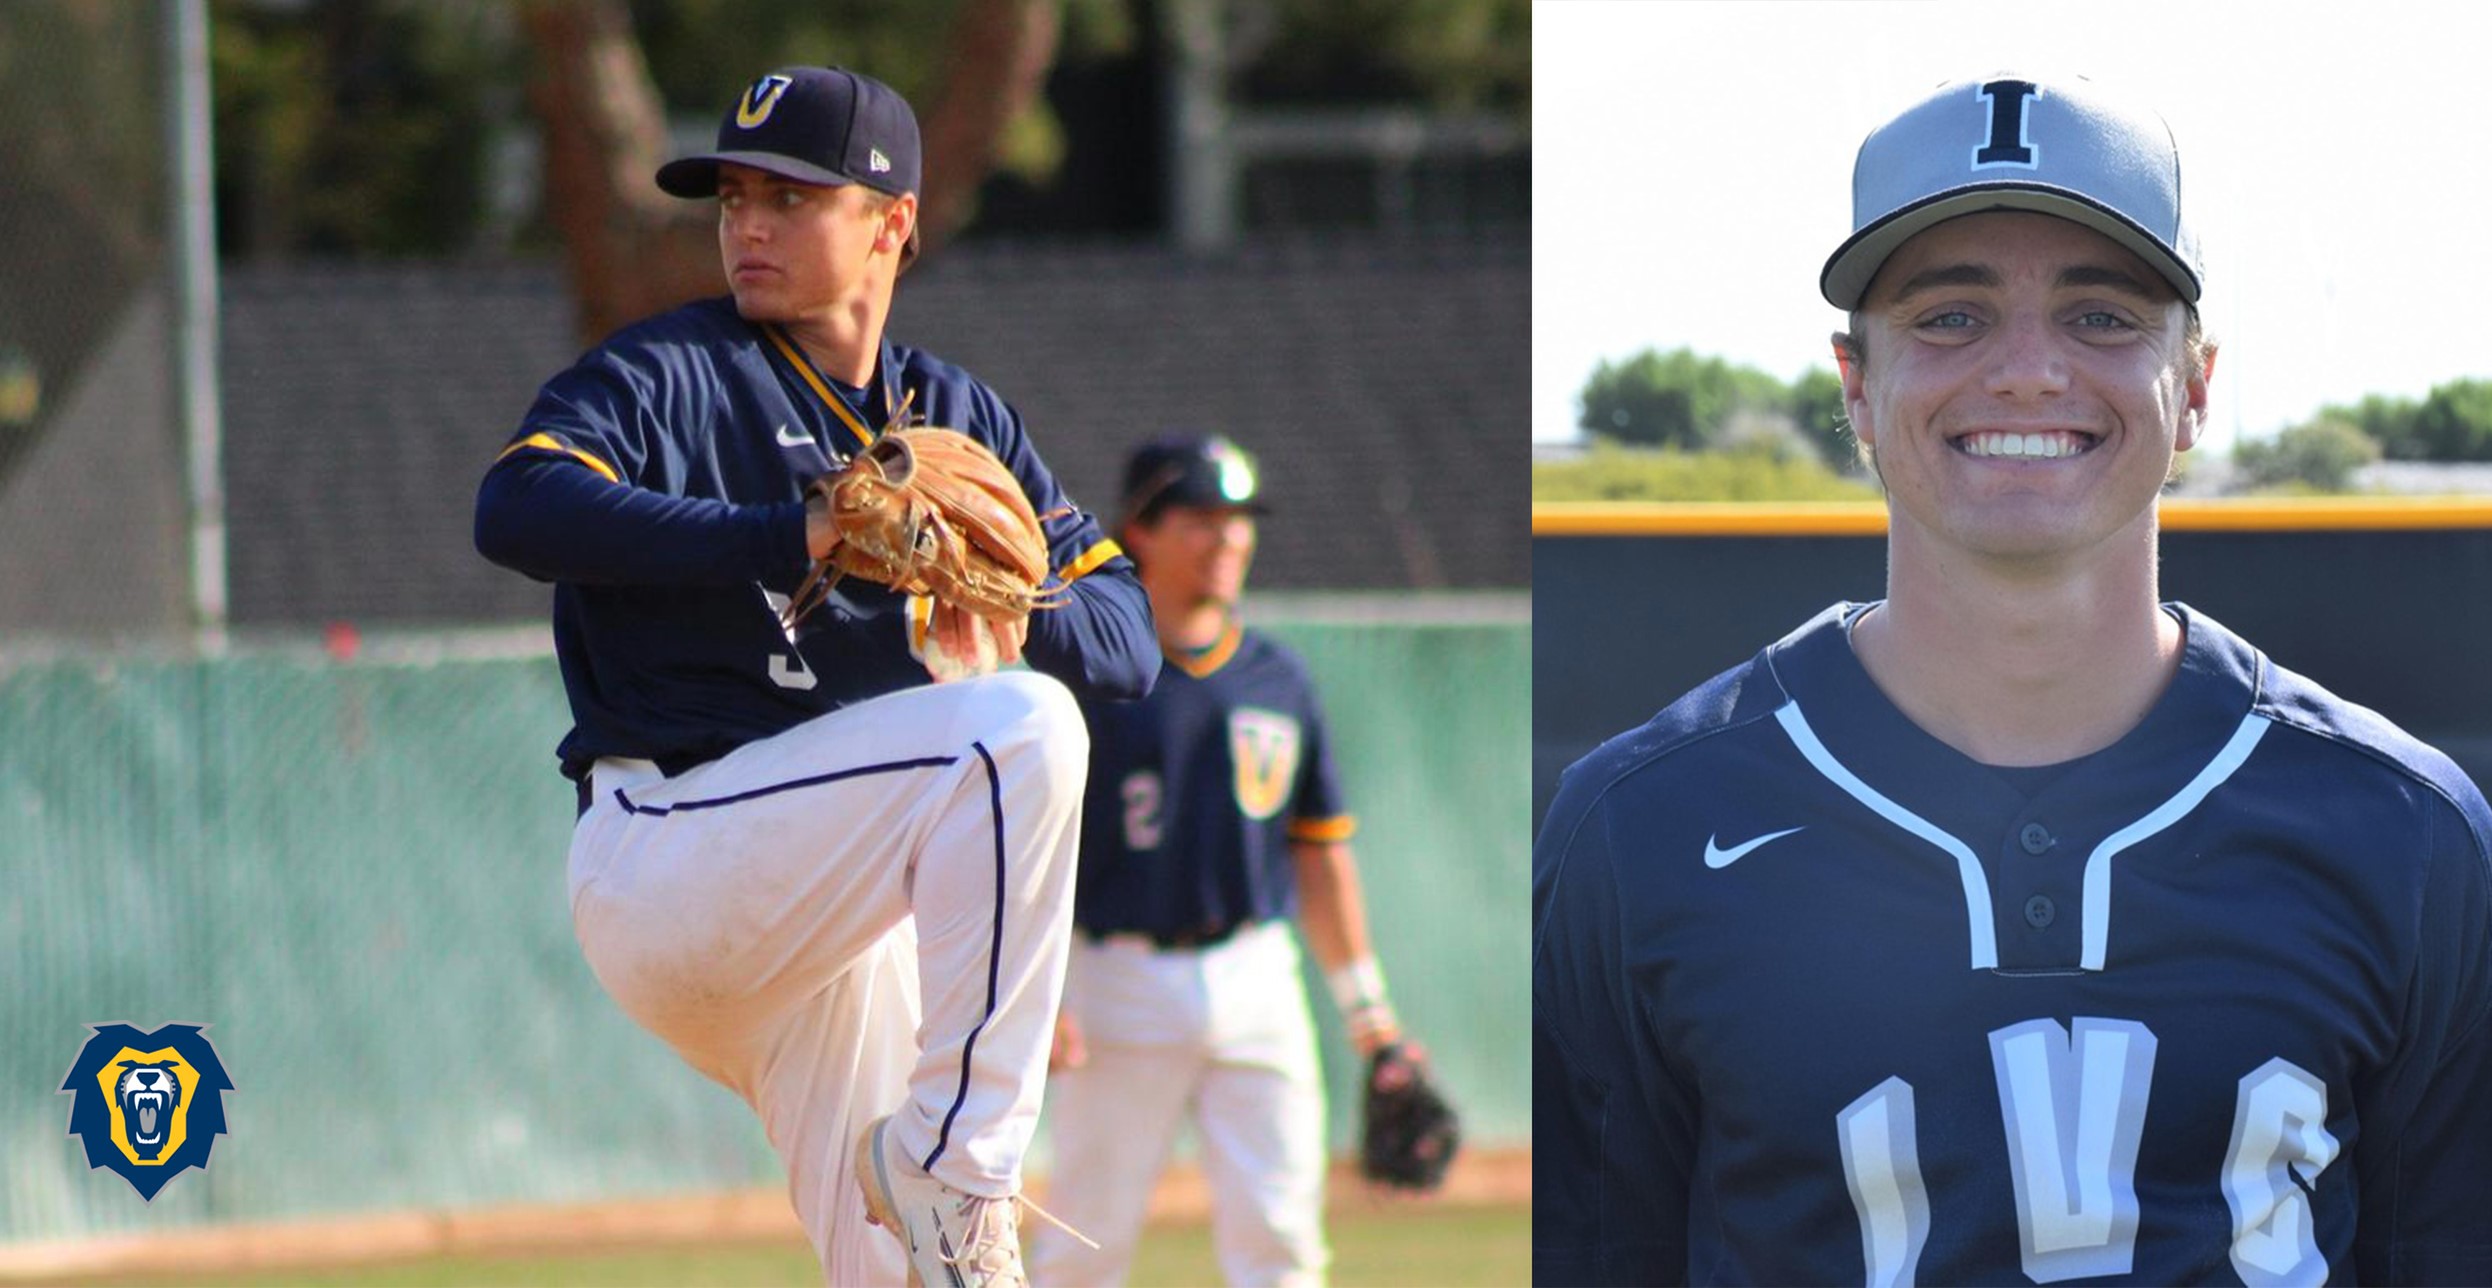 Alumni Report: Madole has a great year on mound at Vanguard